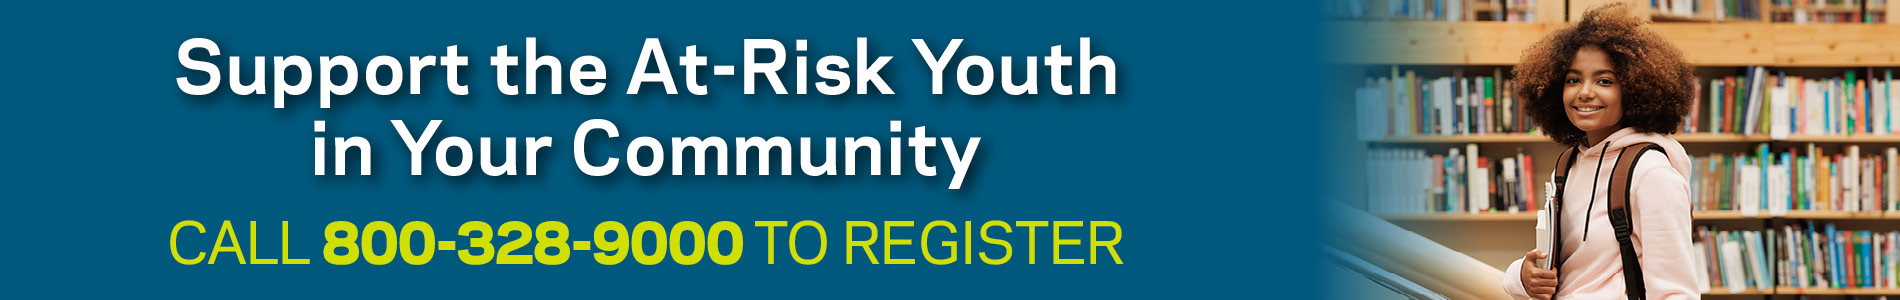 Support the At-Risk Youth in Your Community. Call 800-328-9000 to Register